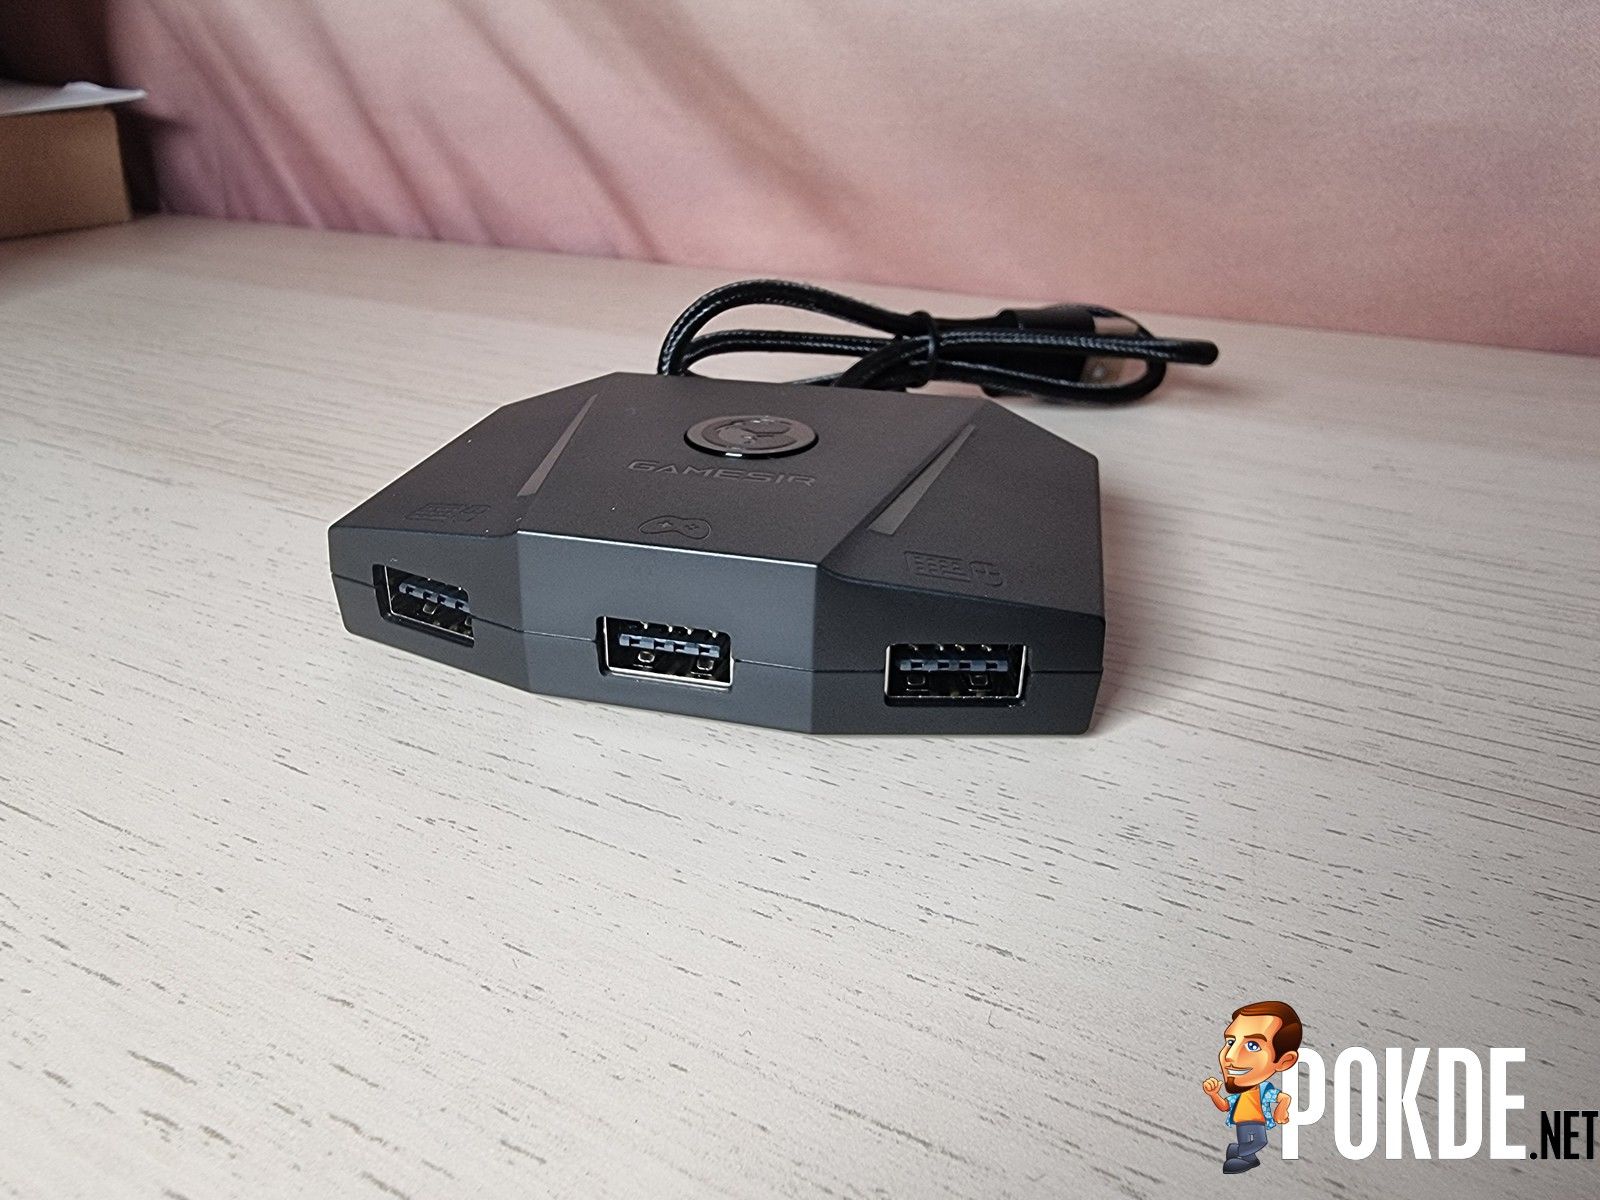 GameSir VX AimBox Review - Bringing PC Gaming To Consoles – Pokde.Net